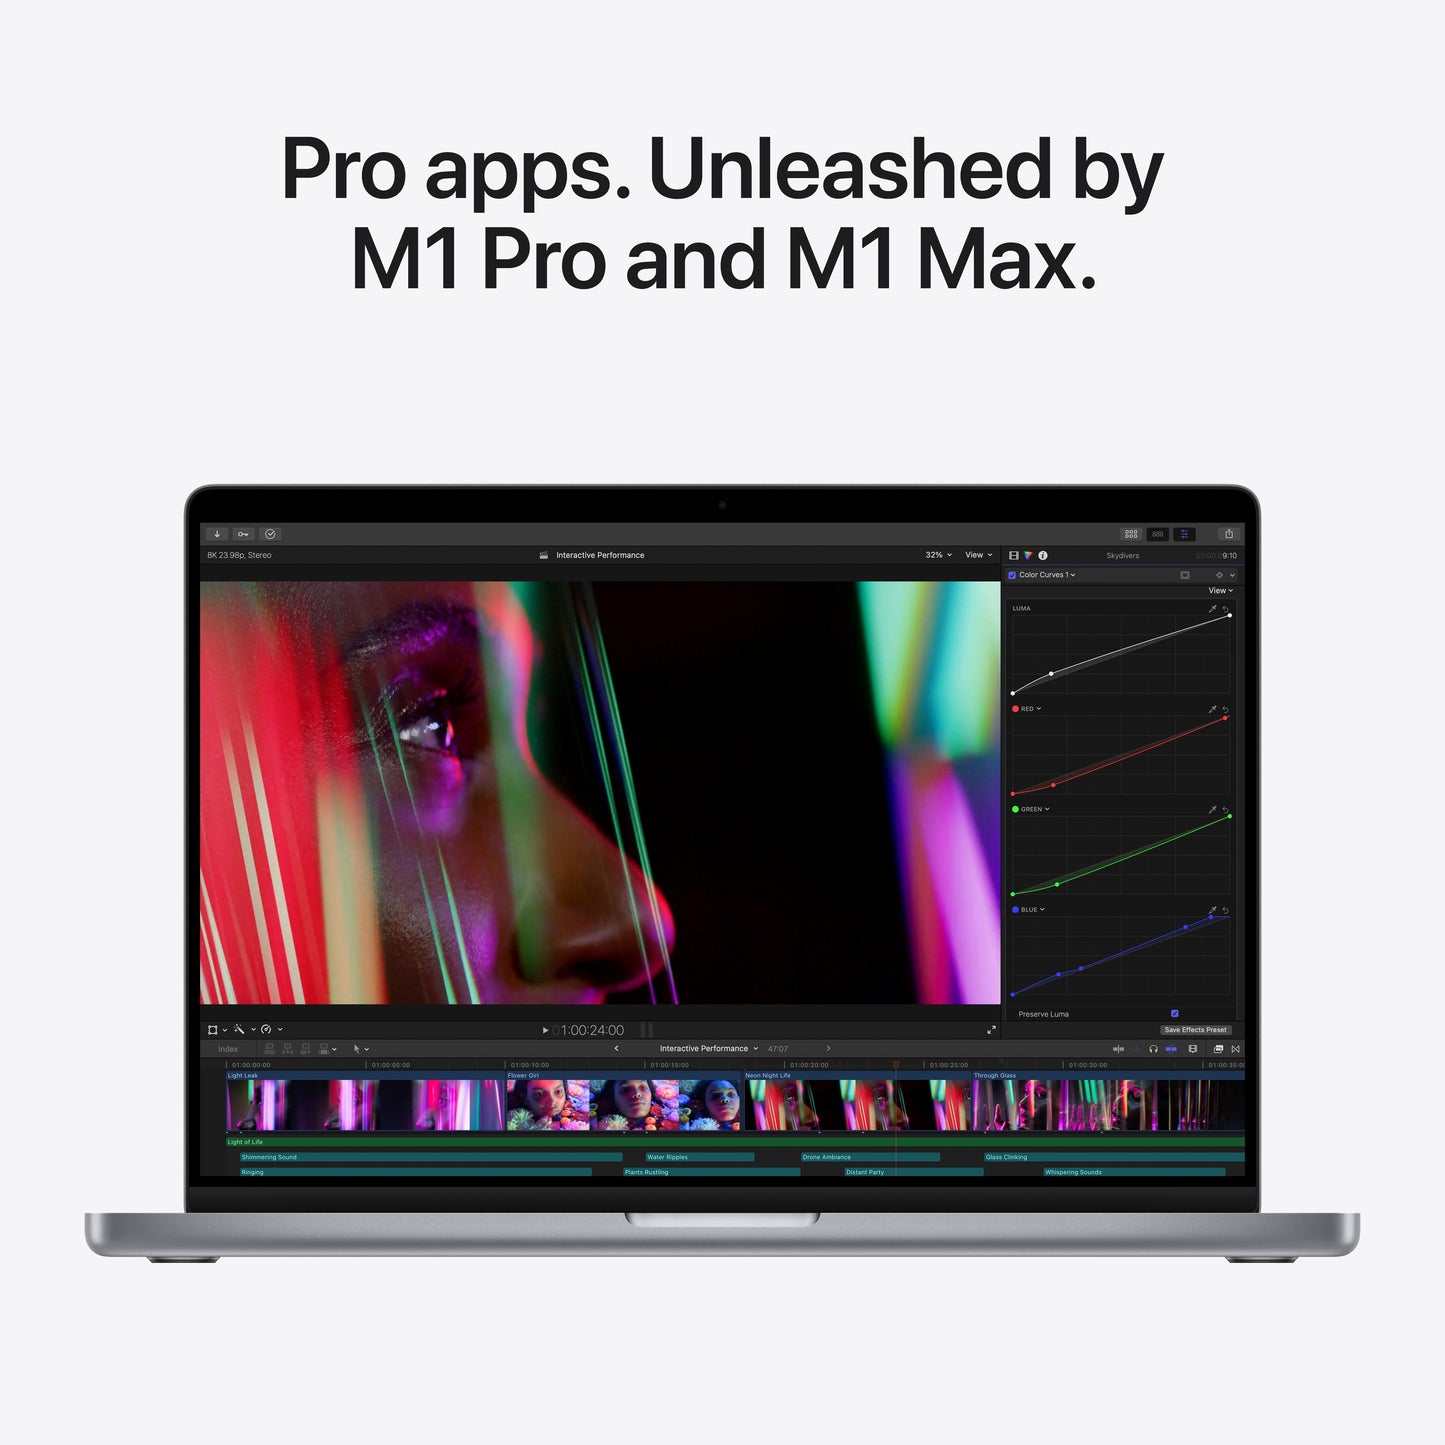 14-inch MacBook Pro: Apple M1 Pro chip with 8‑core CPU and 14‑core GPU, 512GB SSD - Space Grey